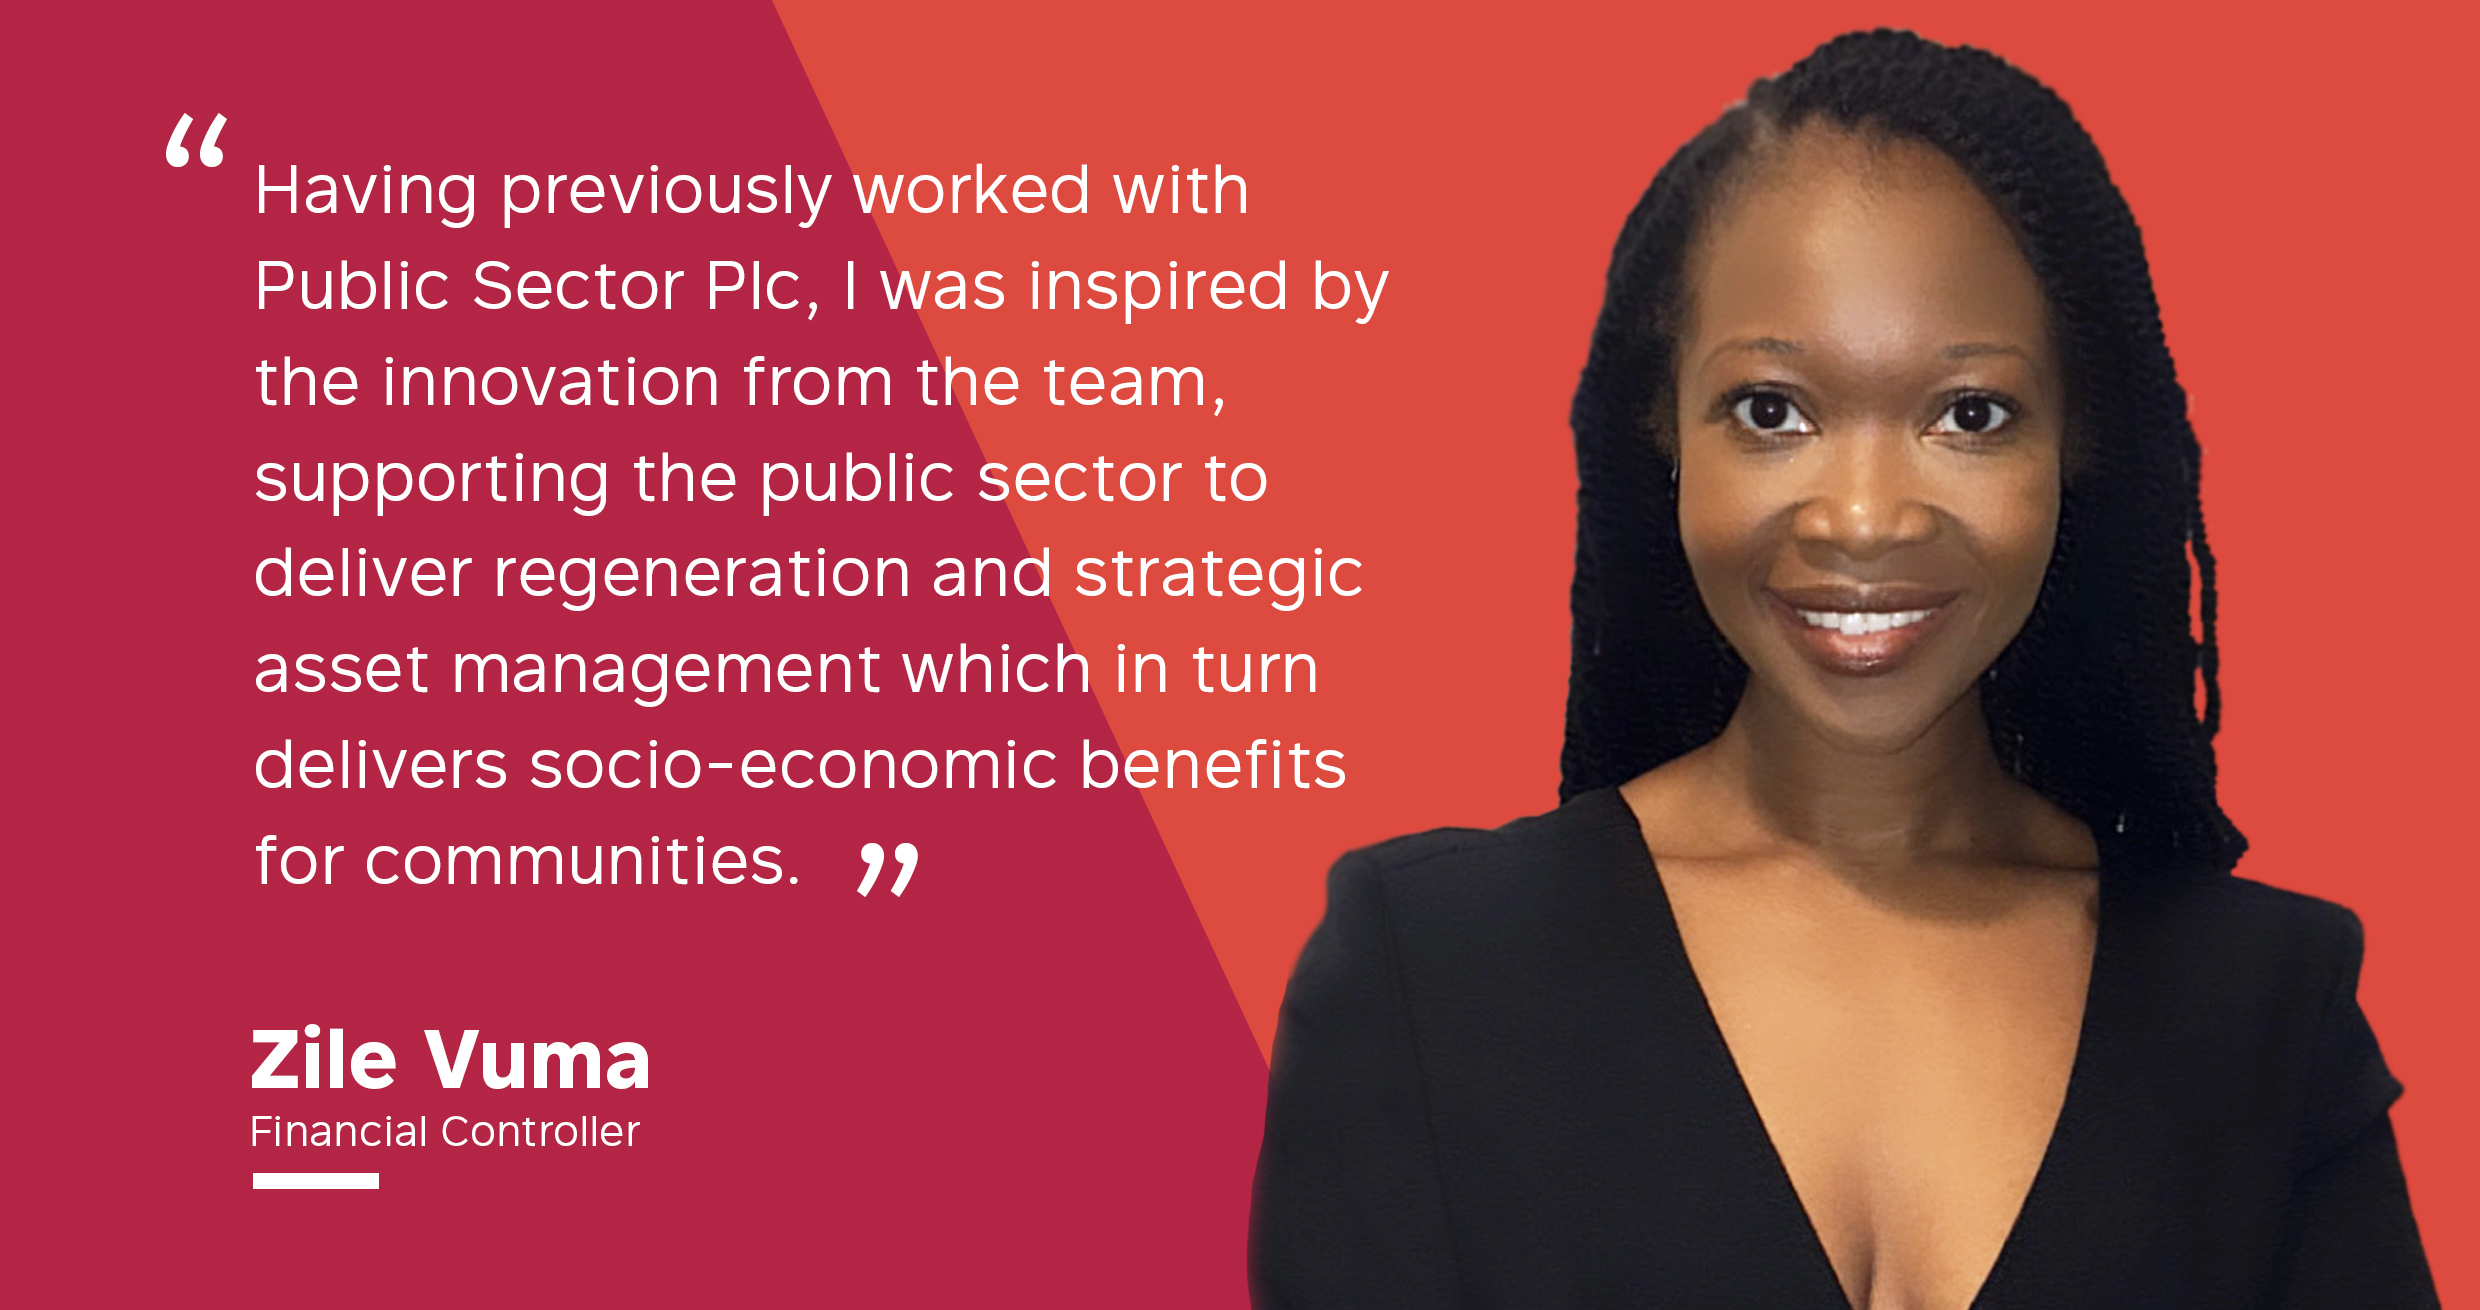 Public Sector Plc is delighted to announce, the appointment of  Zile Vuma as the new Financial Controller